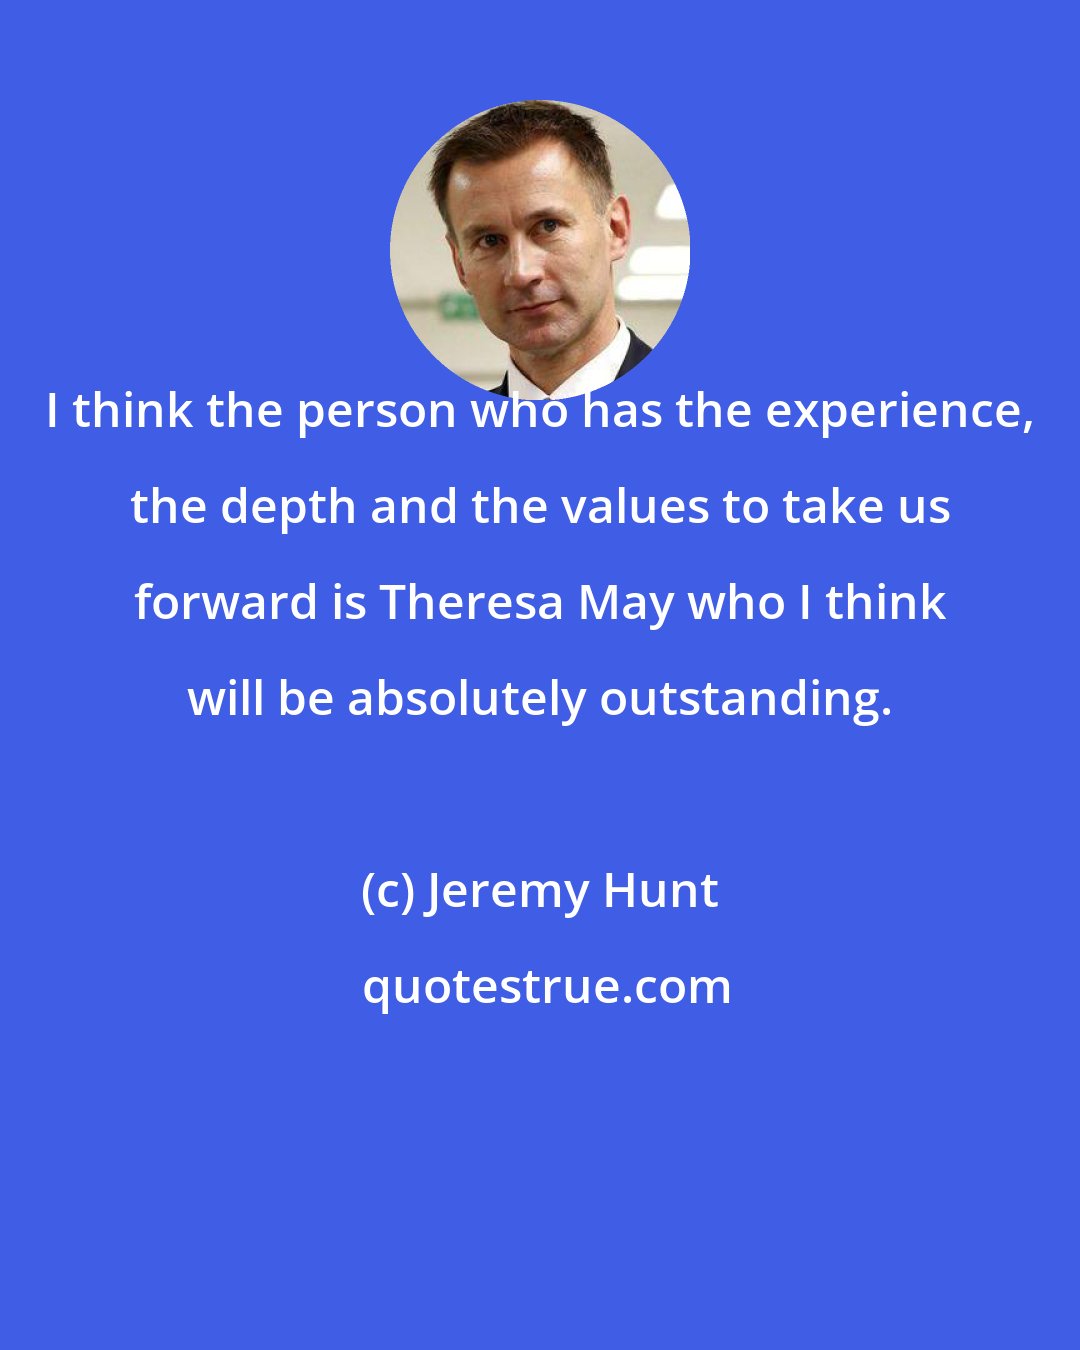 Jeremy Hunt: I think the person who has the experience, the depth and the values to take us forward is Theresa May who I think will be absolutely outstanding.